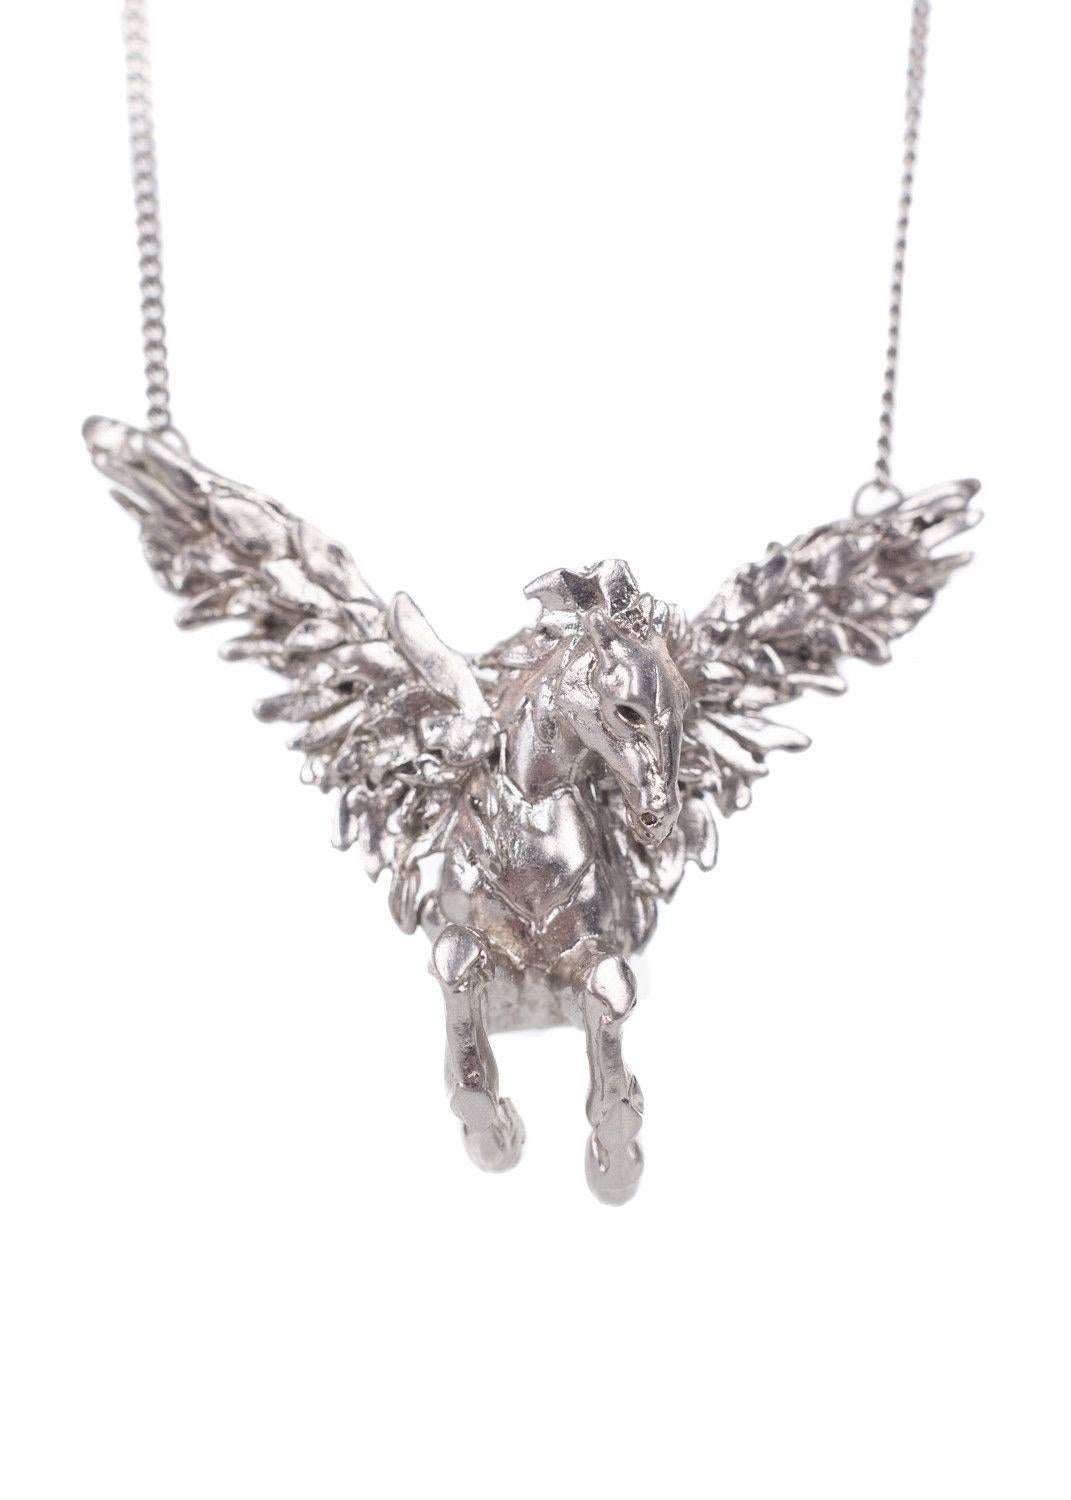 Get your Roberto Cavalli Necklace for the minimal decadence. This necklace features a thin silver chain, gold and silver feather charm pendant, and artsy blue stone applique. You can pair this necklace with a nude bodycon dress and go.

18 inch